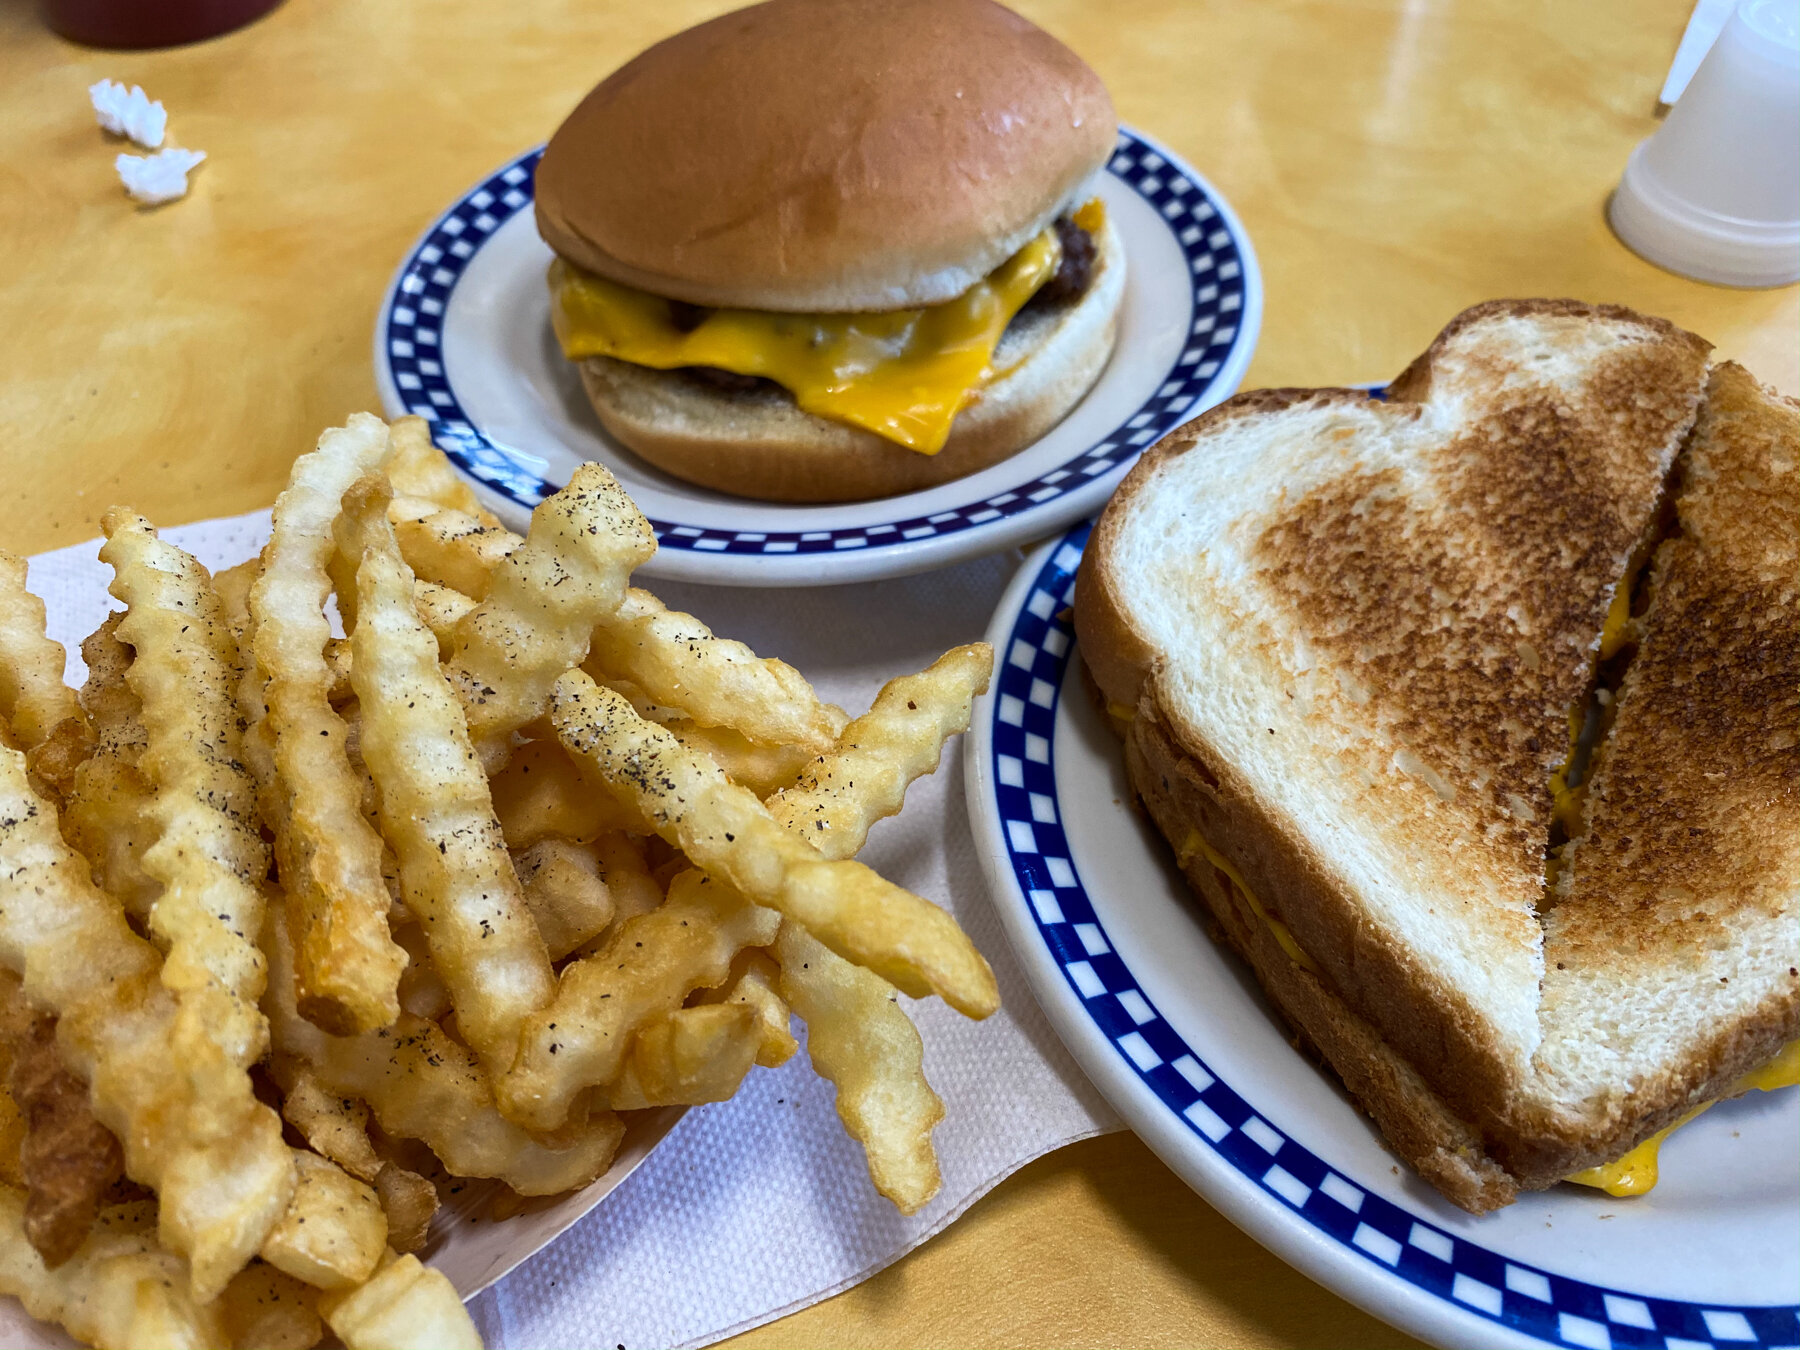 Kewpee's cheeseburger, fries, and toasted cheese sandwich